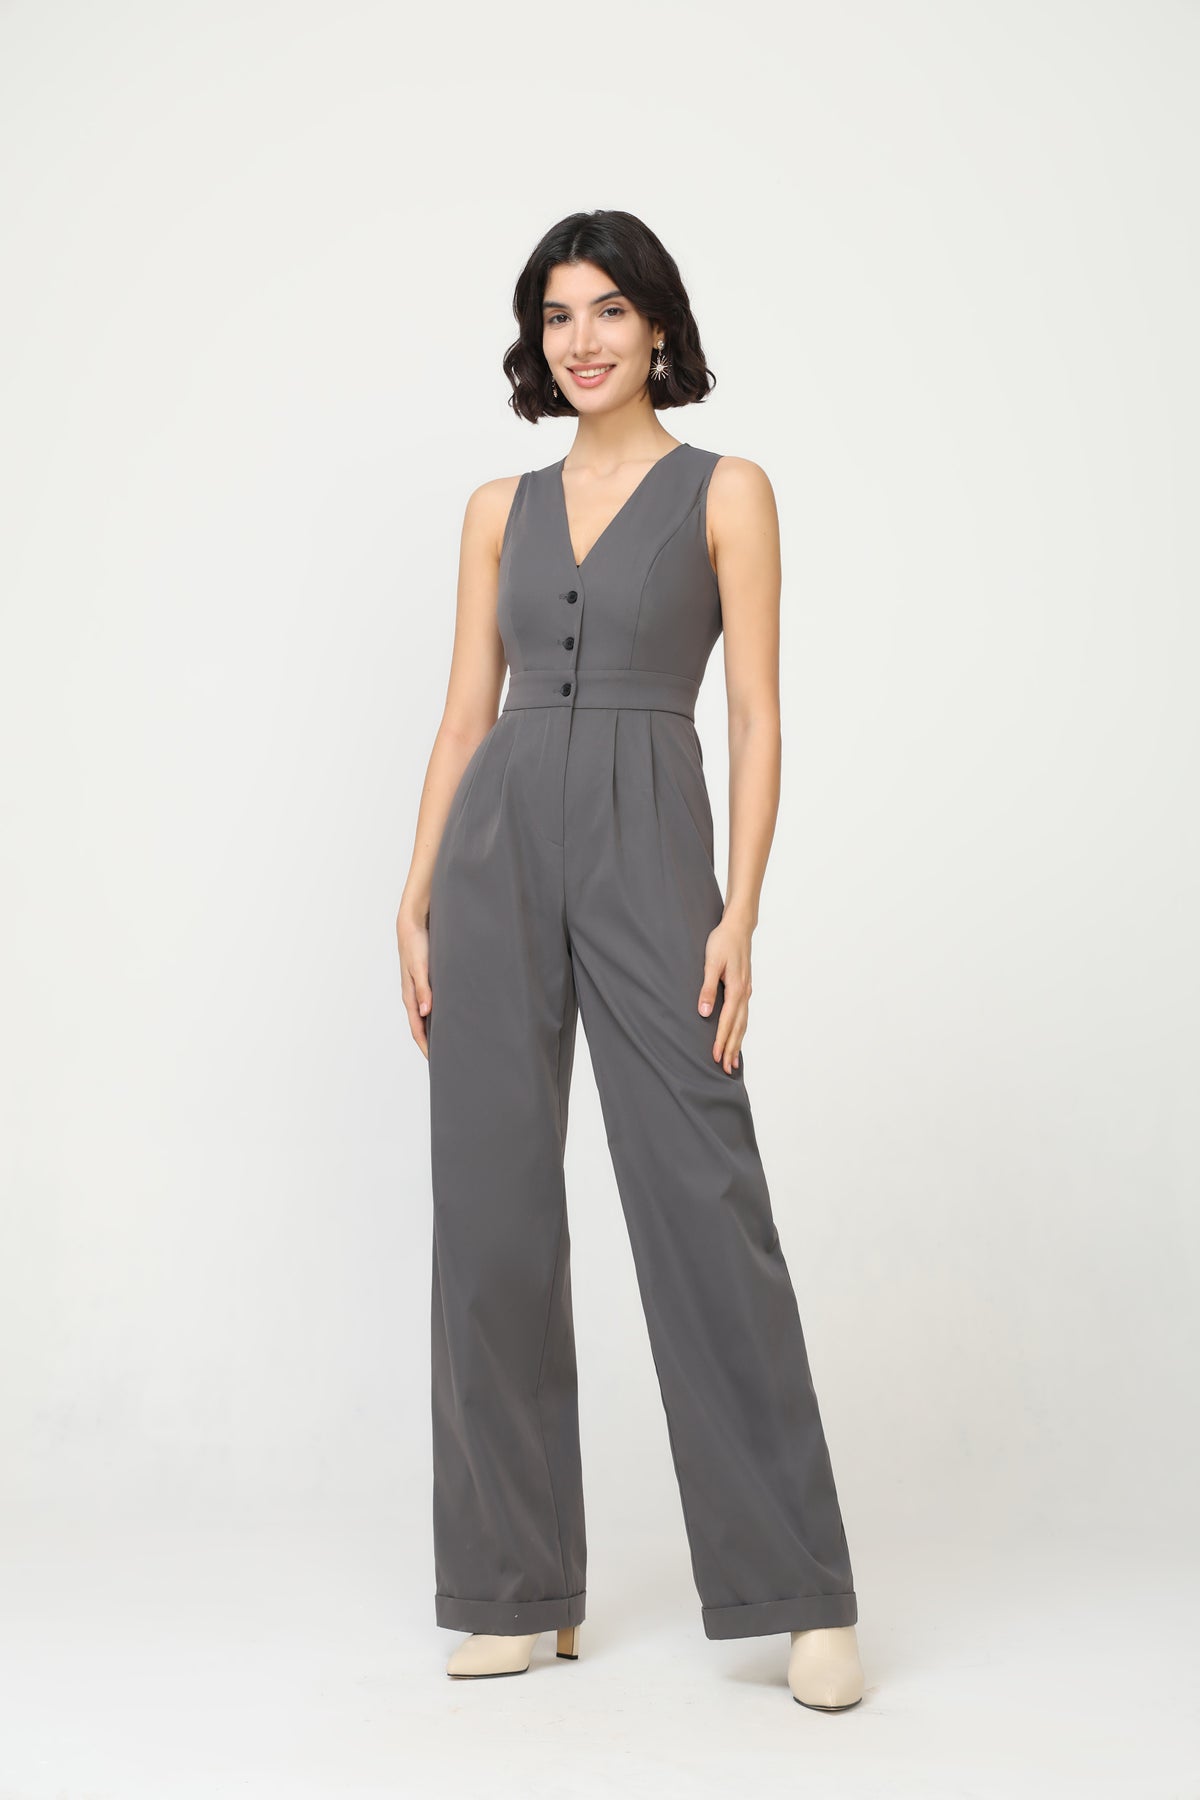 Sleeveless office jumpsuit with front buttons